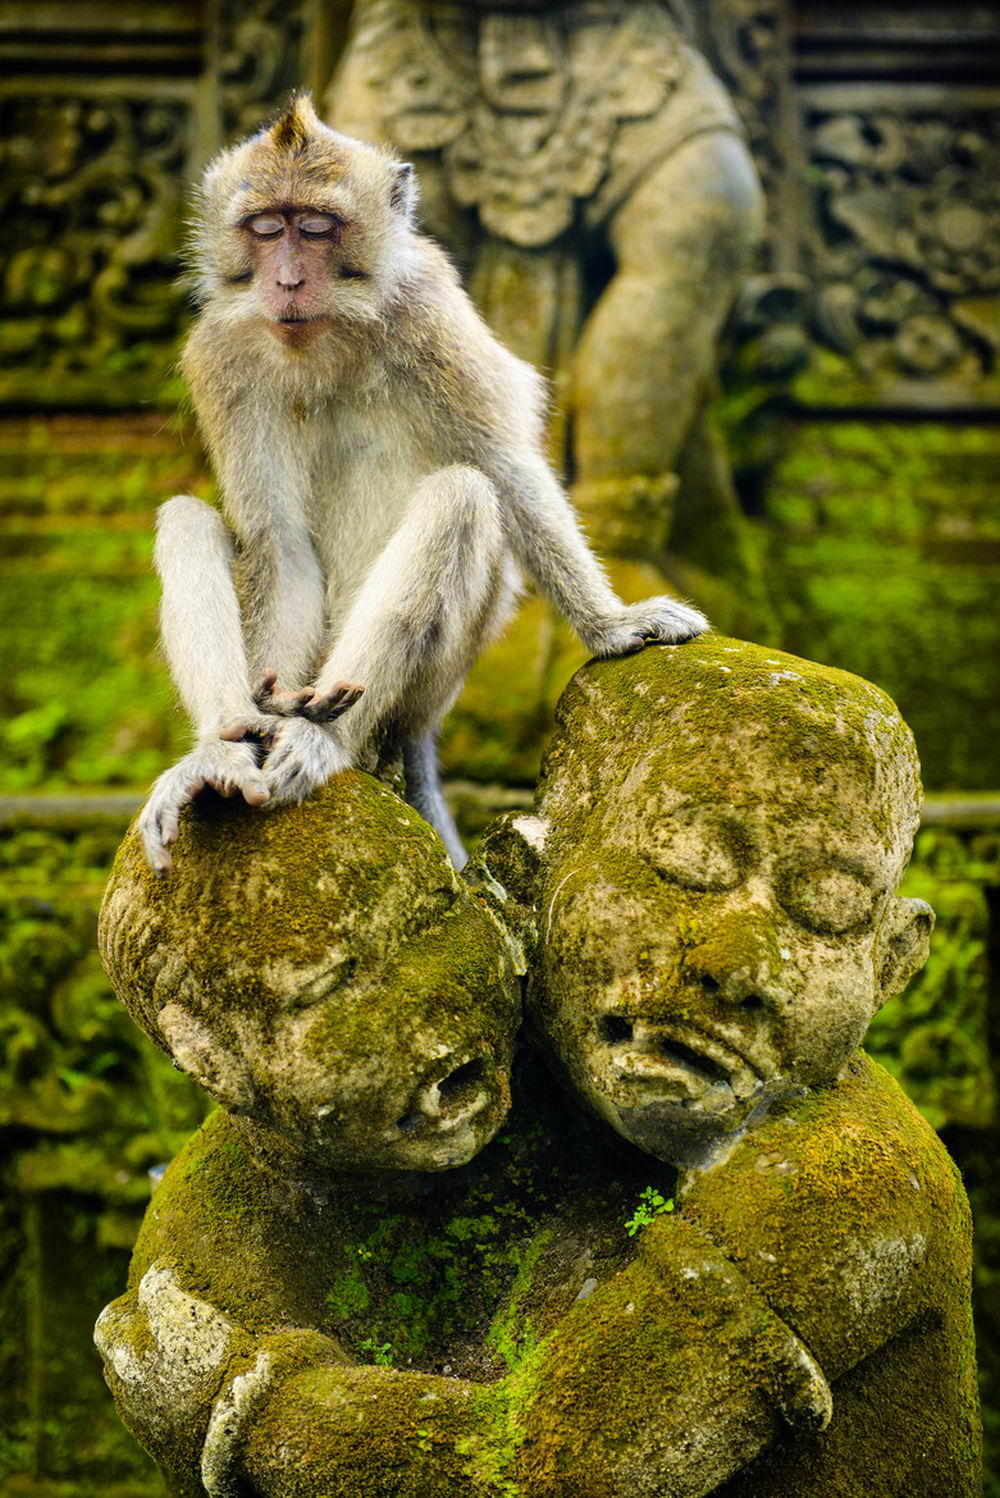 remarkable image of macaque